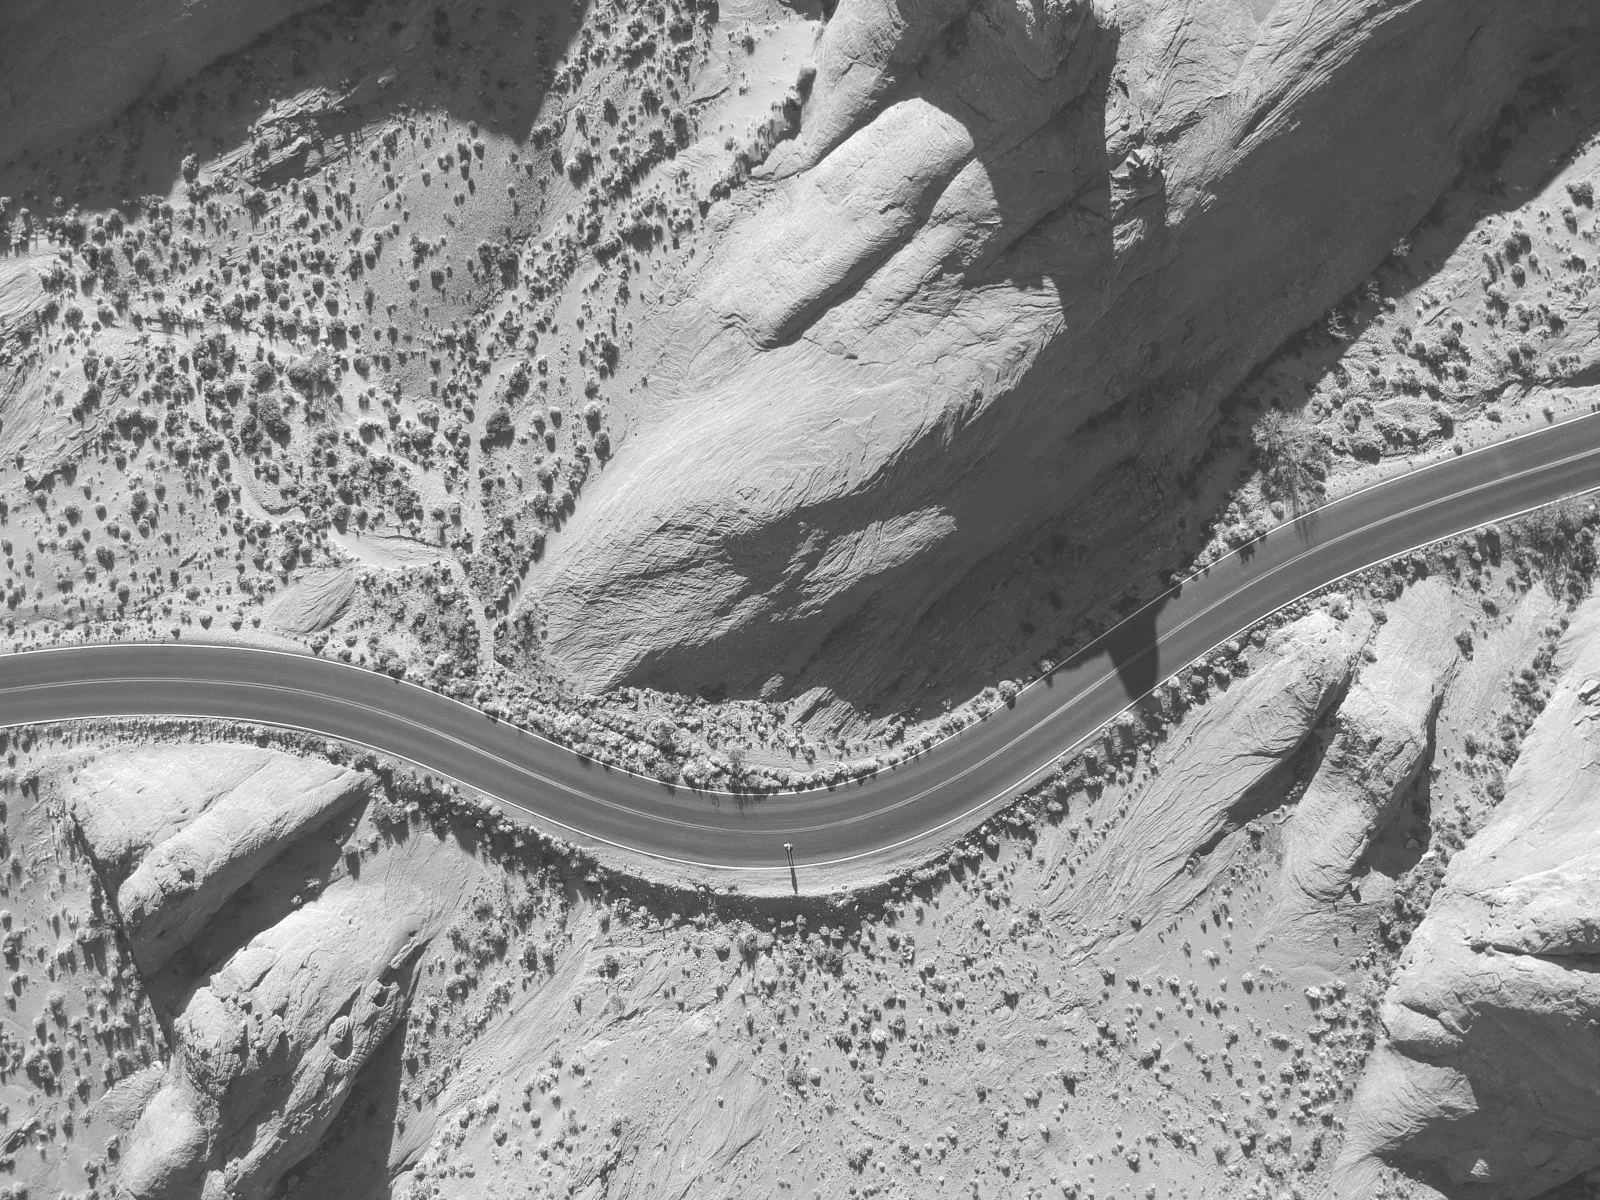 An aerial view of a winding desert road meandering between rugged mountains, highlighting the contrasting textures and patterns of the landscape and emphasizing the isolation and vastness of the desert terrain.